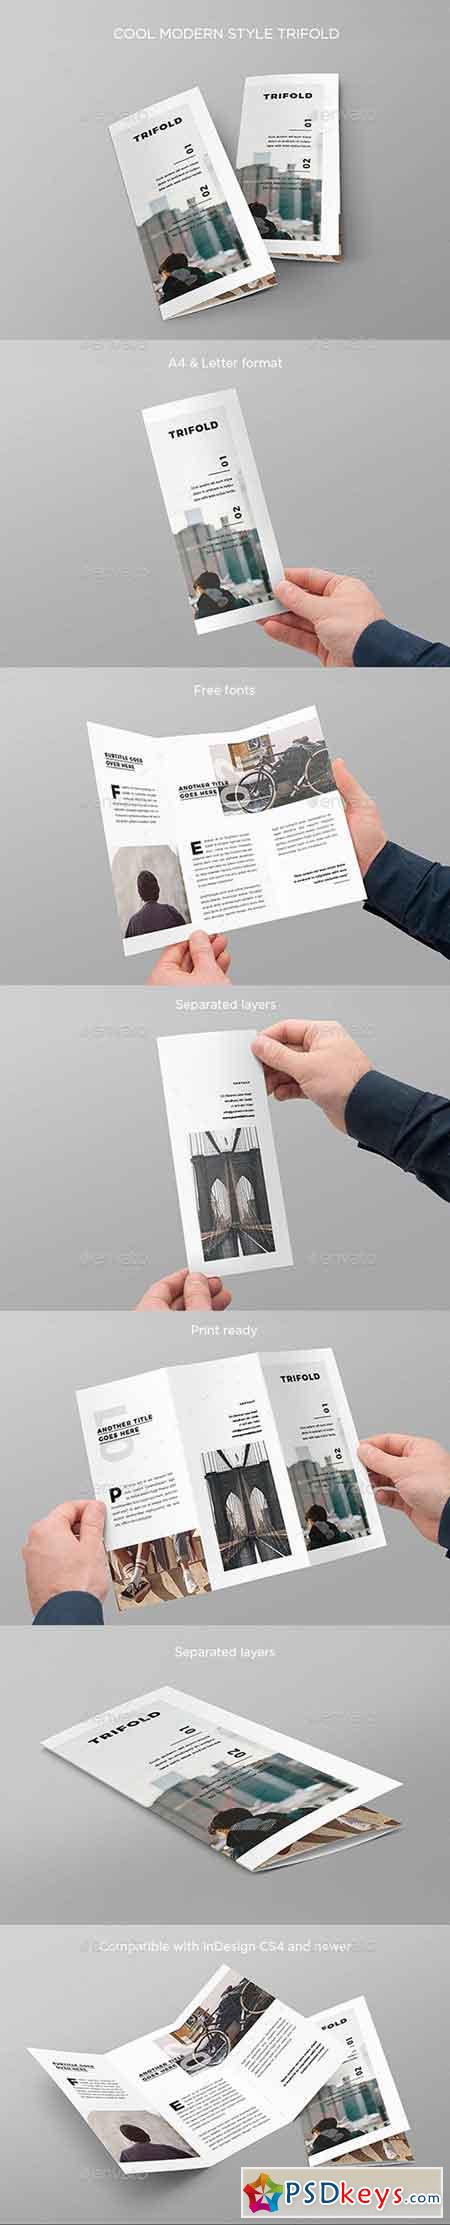 Cool Modern Style Trifold 20453014